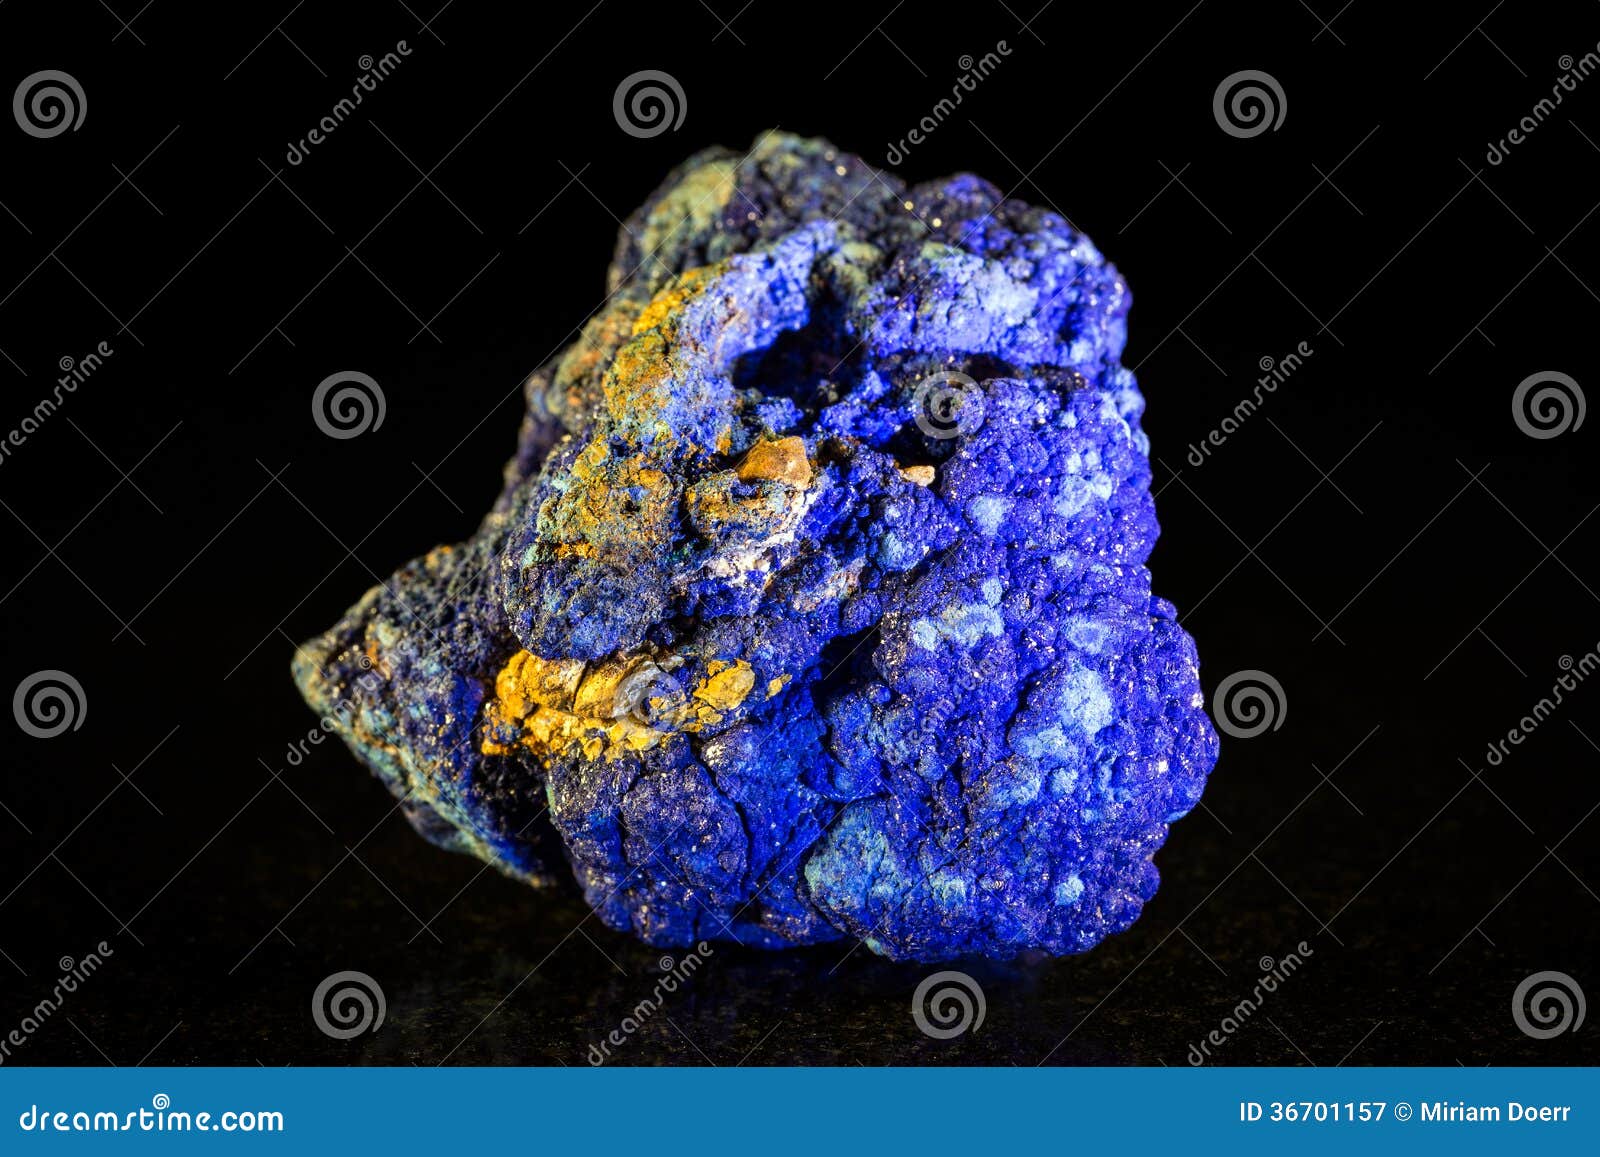 azurite mineral stone in front of black